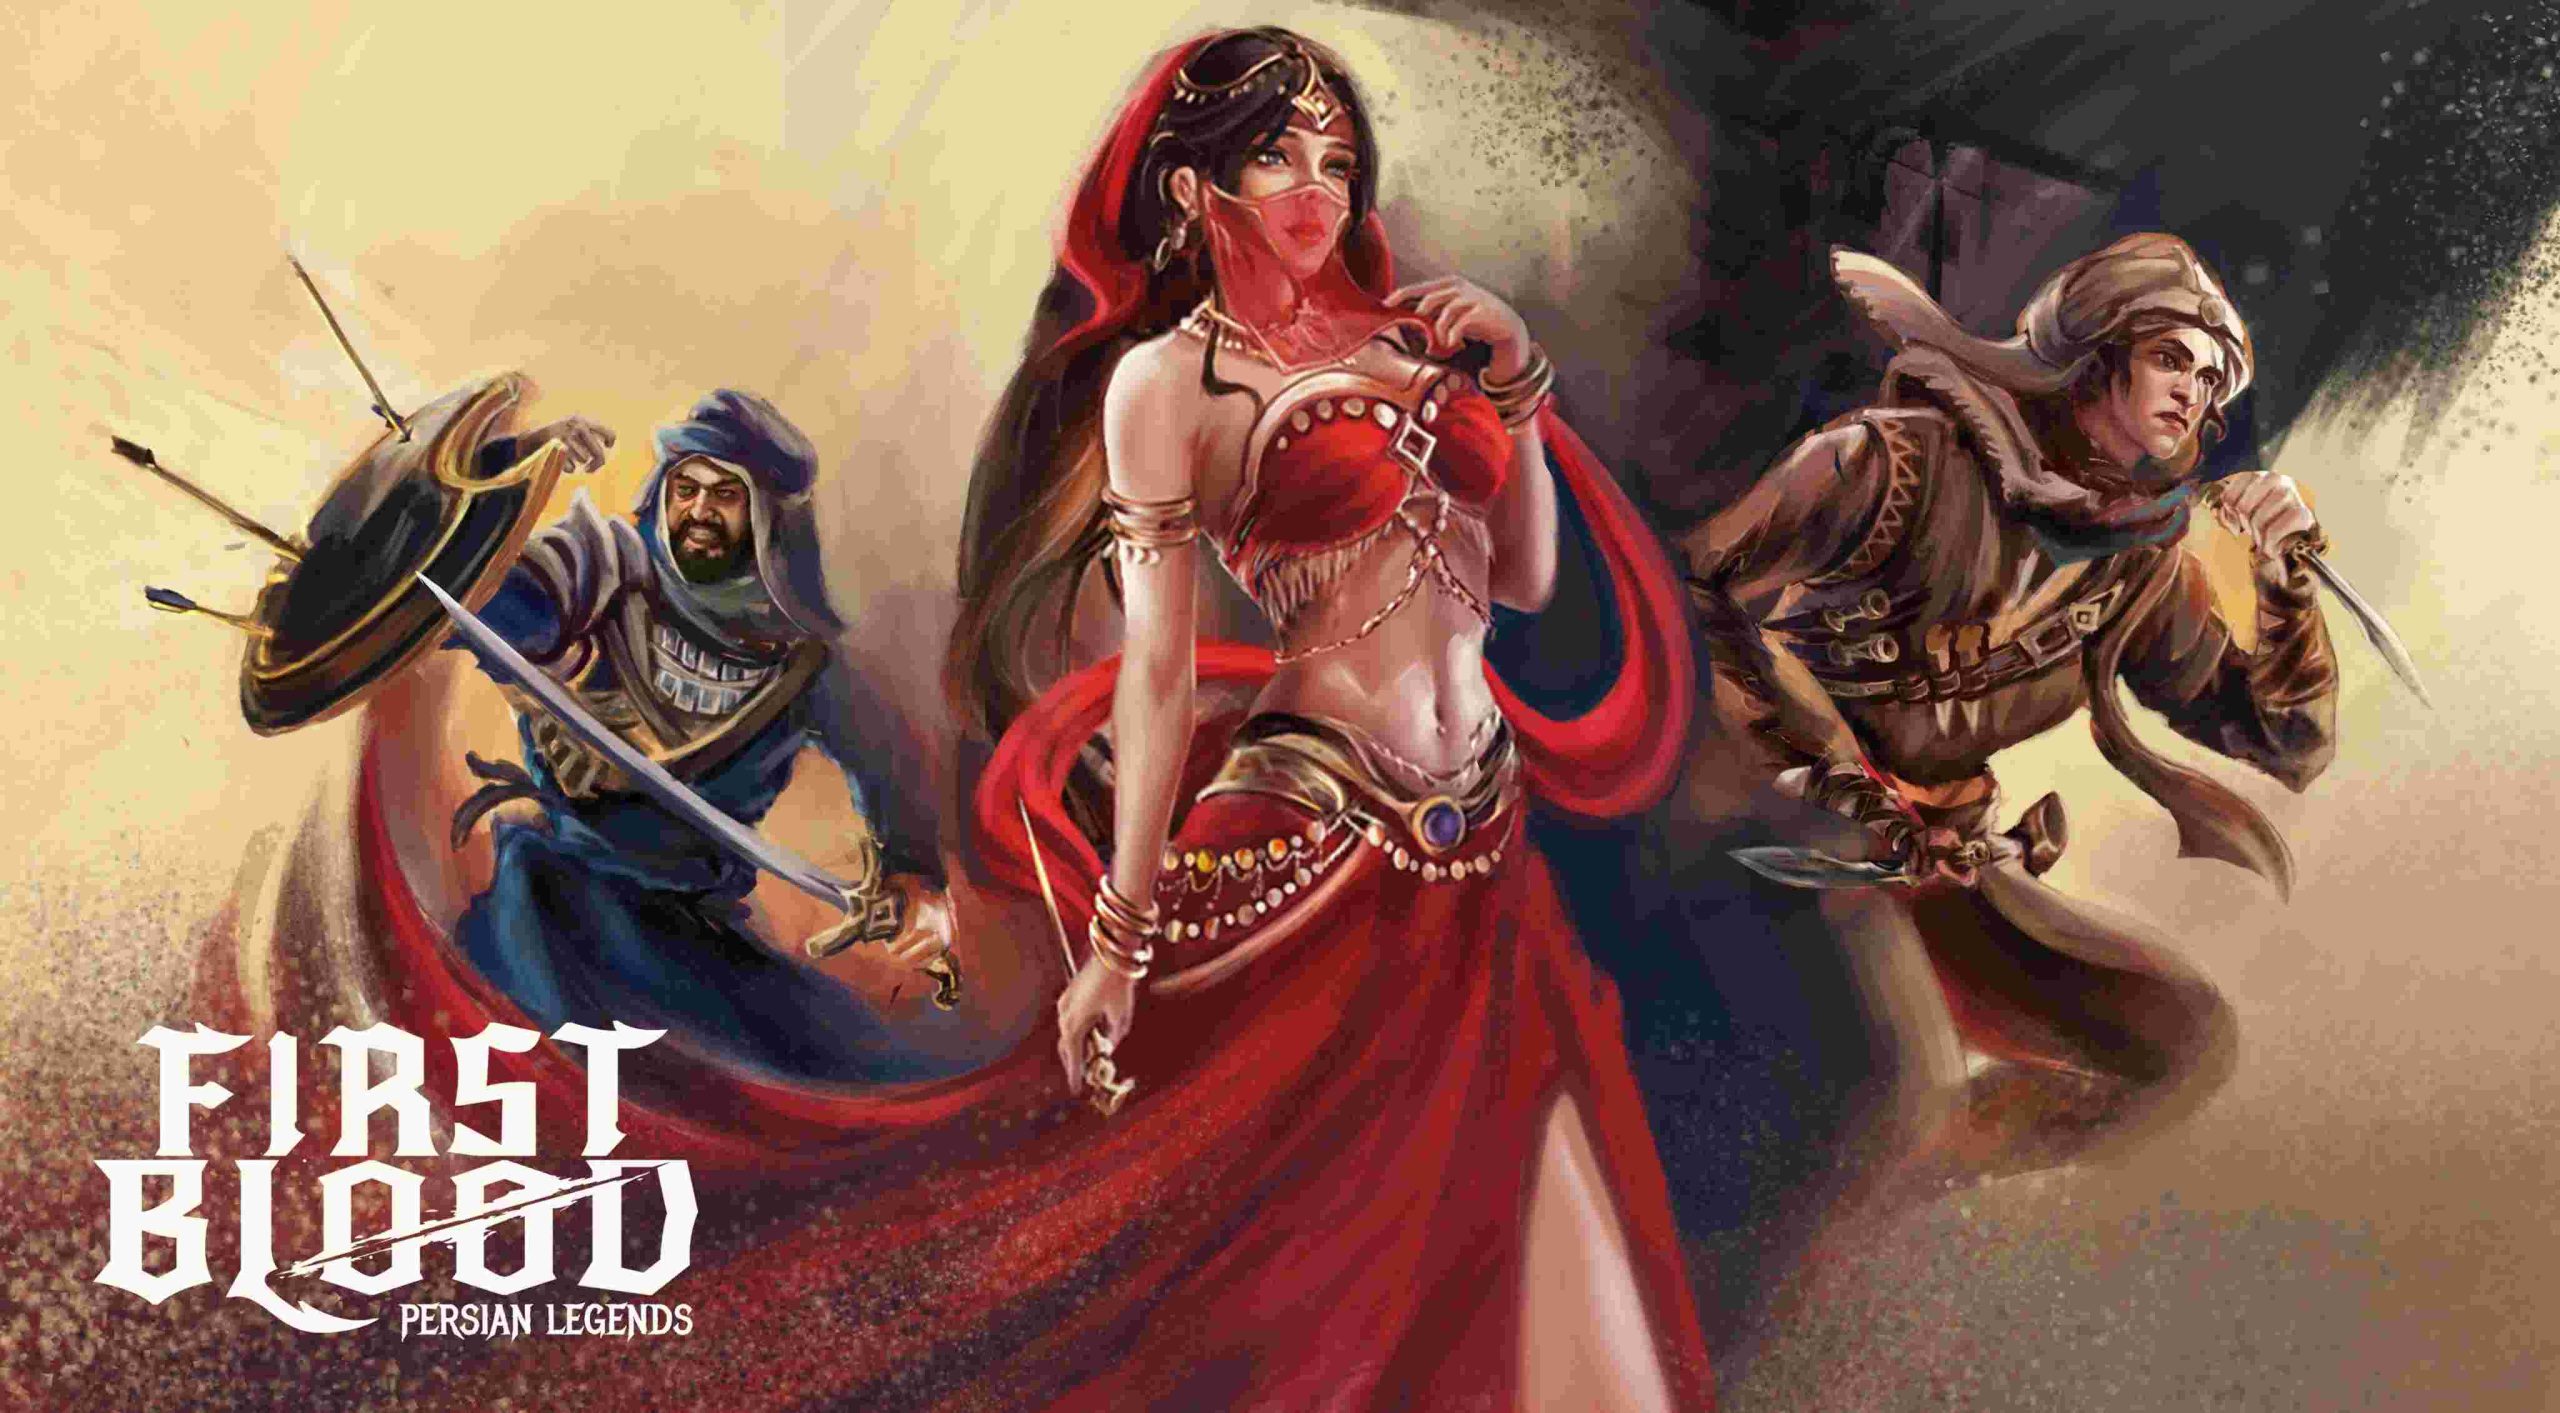 Six young students of Bangladesh are bringing a new game, “First Blood: Persian Legends.”